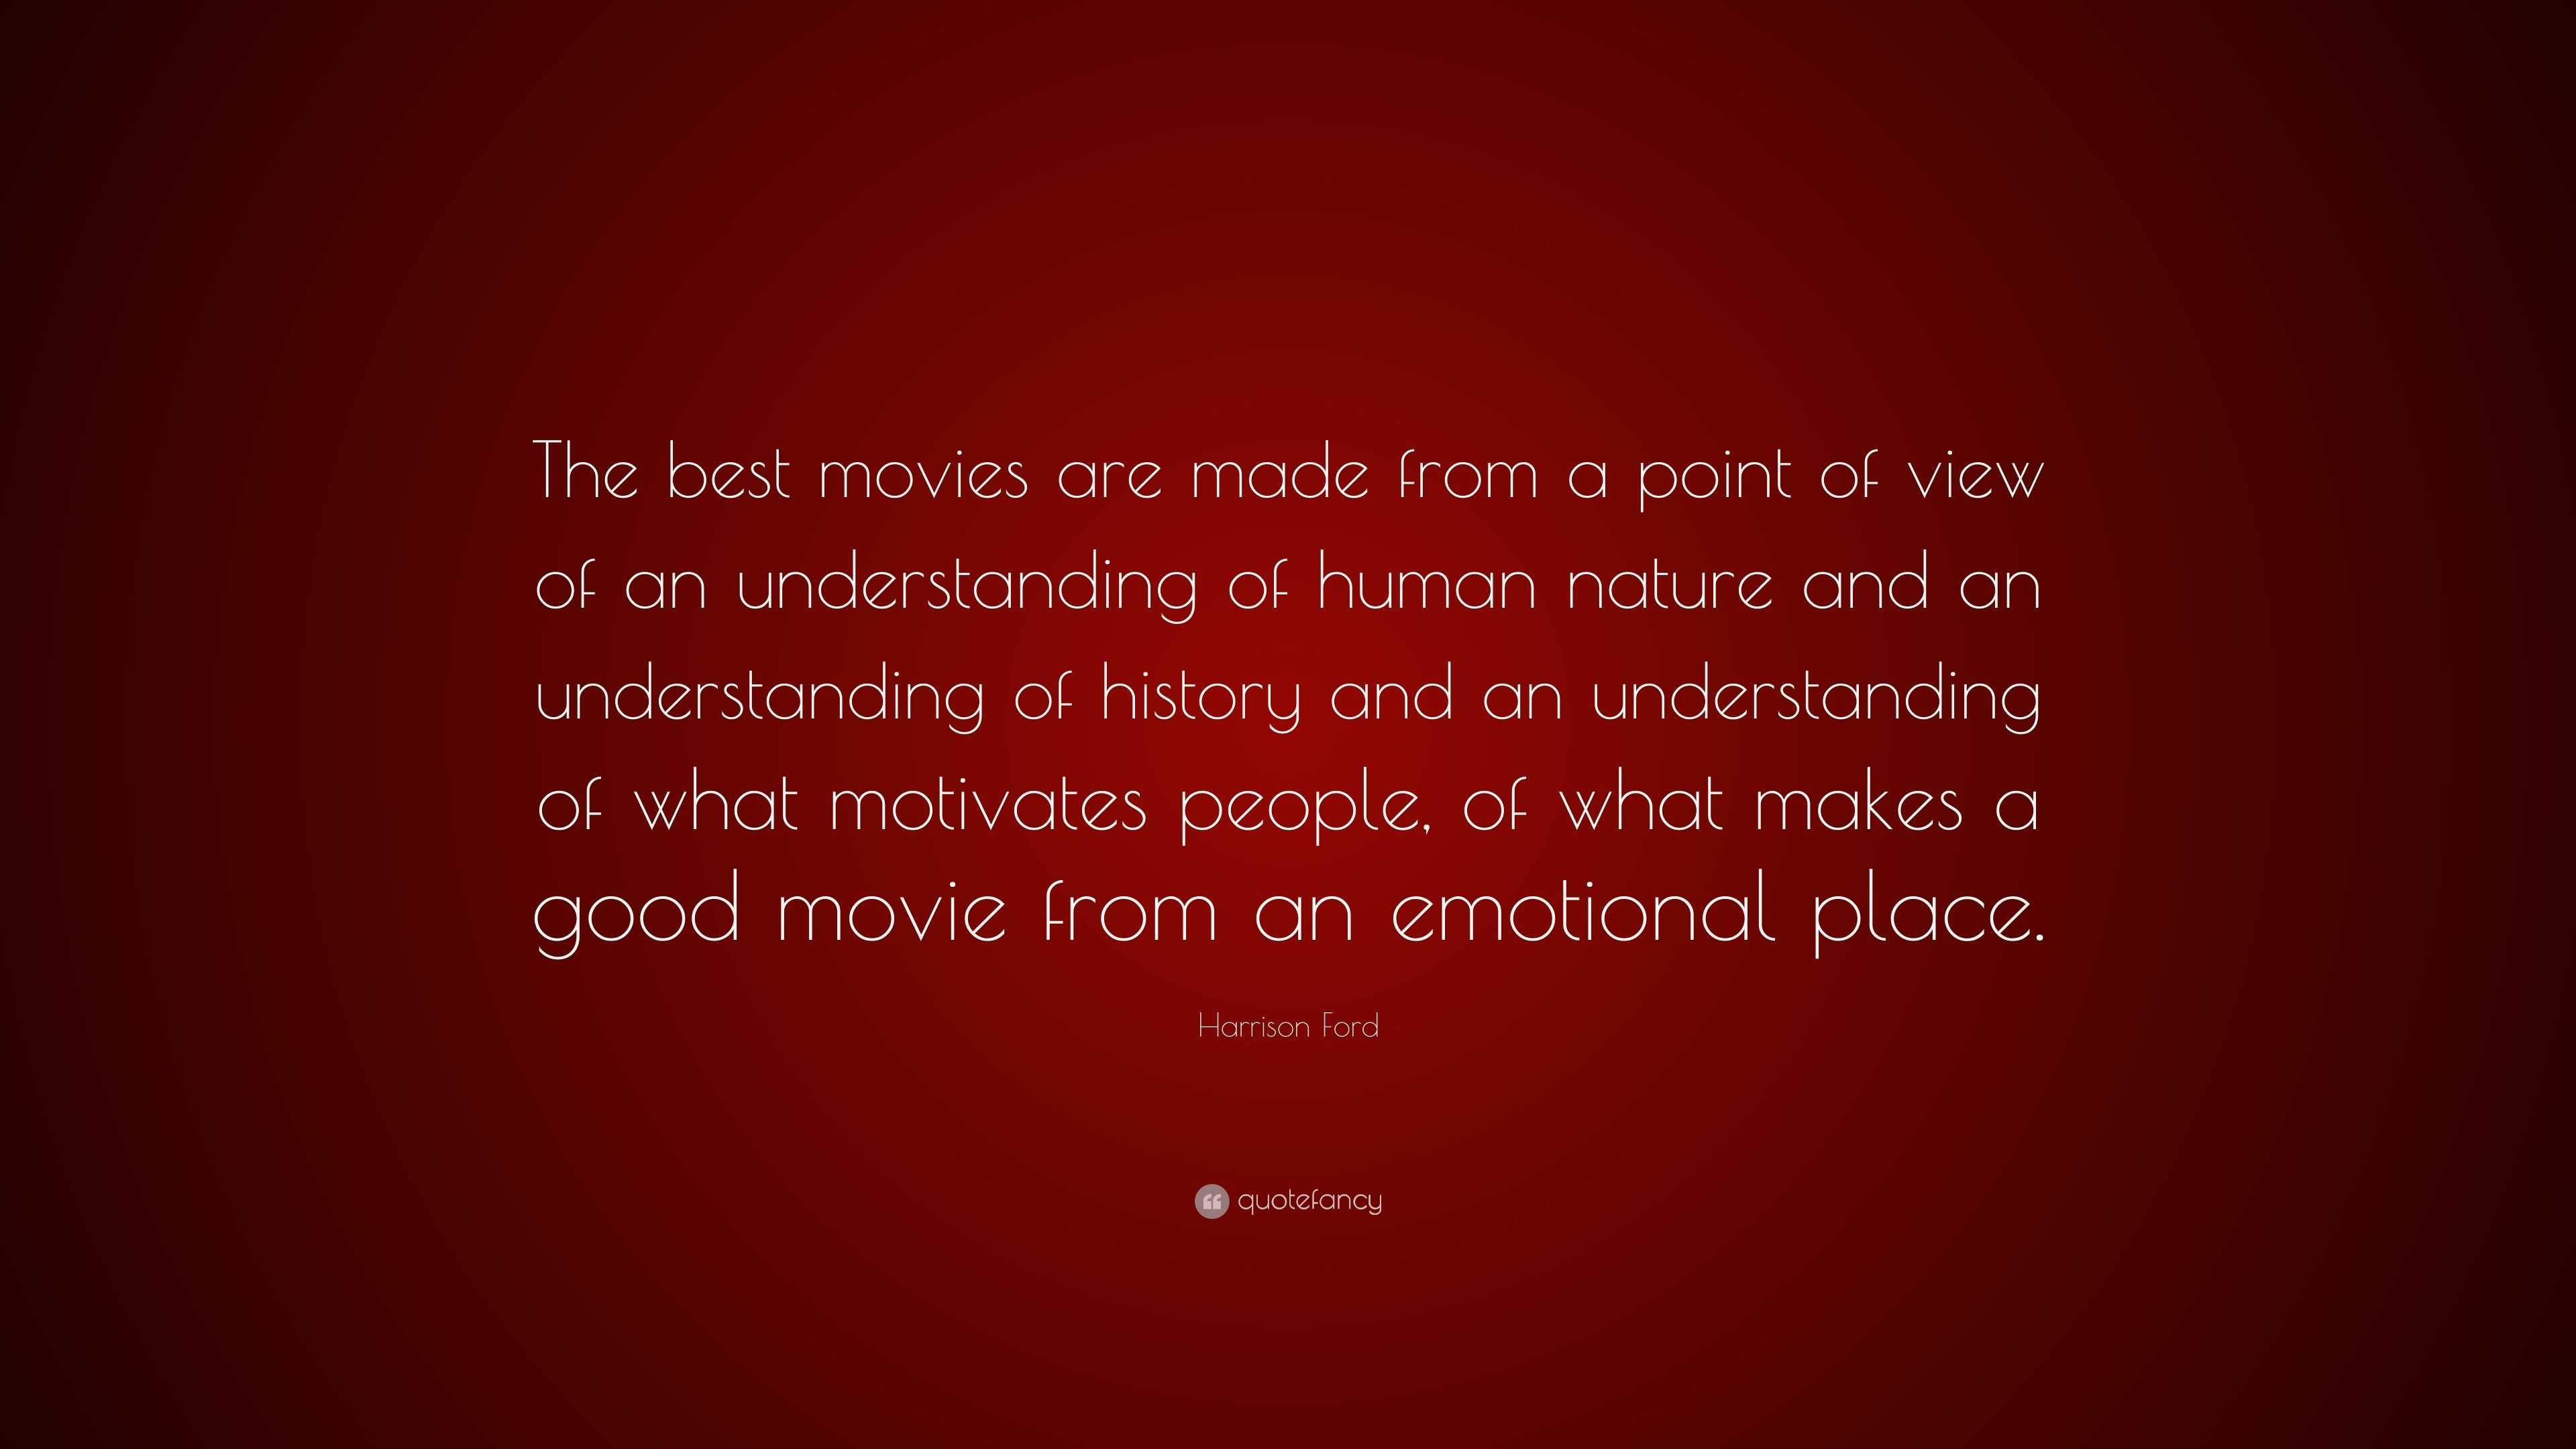 Harrison Ford Quote: “The best movies are made from a point of view of an understanding of human and an understanding of history and an...”